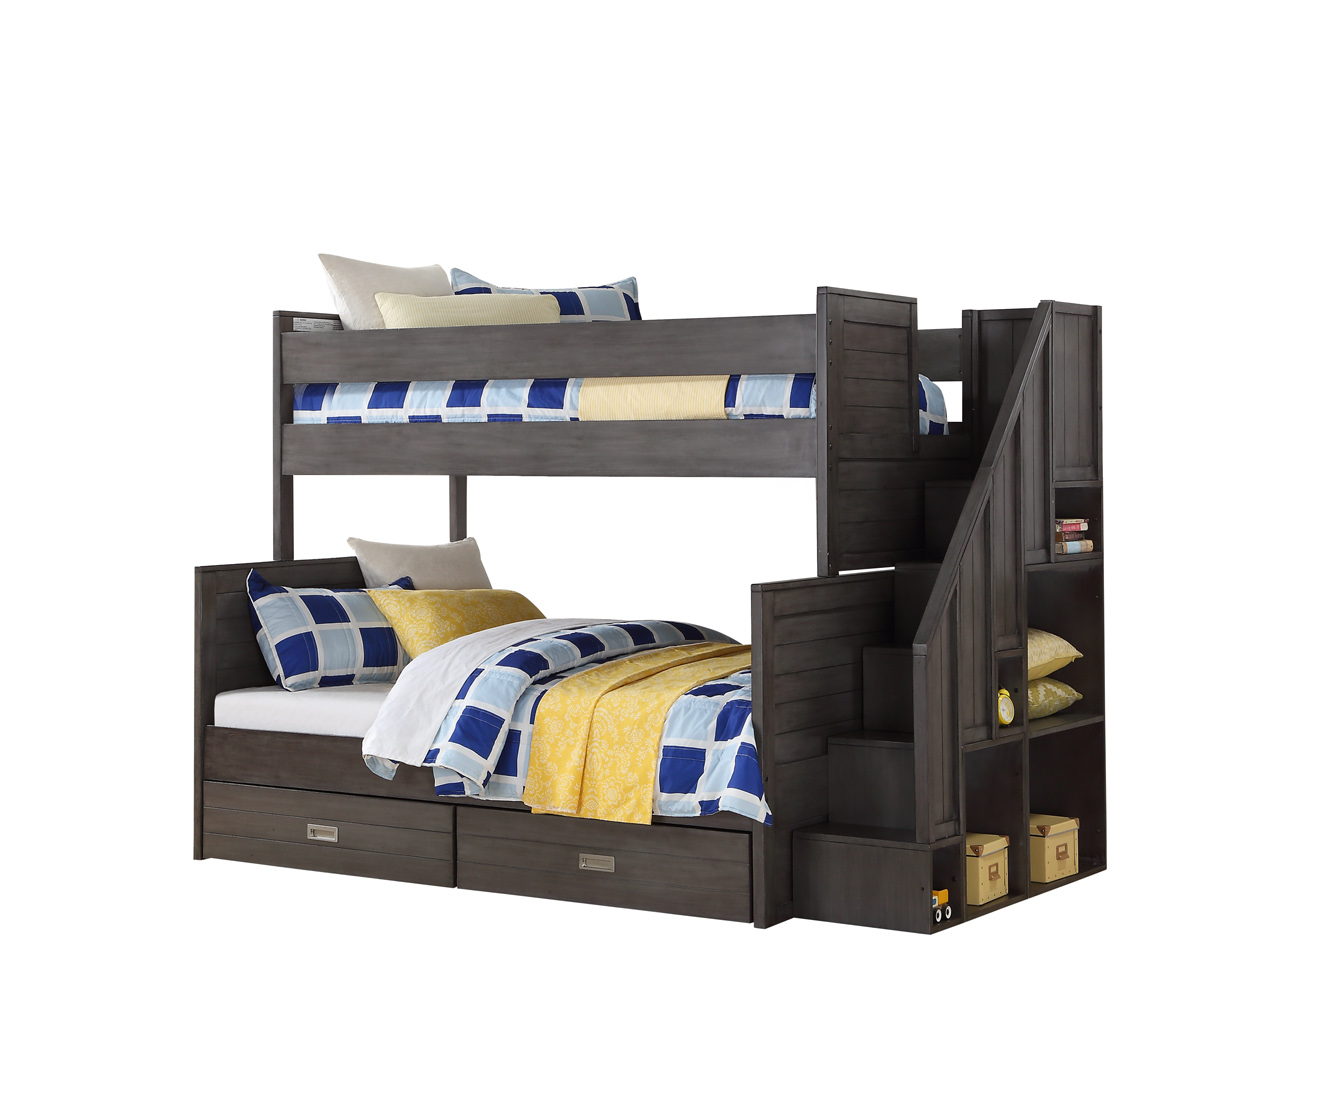 Caramia Furniture Bunk Beds, Ryan Twin Over Full Stair Bunk Bed Instructions